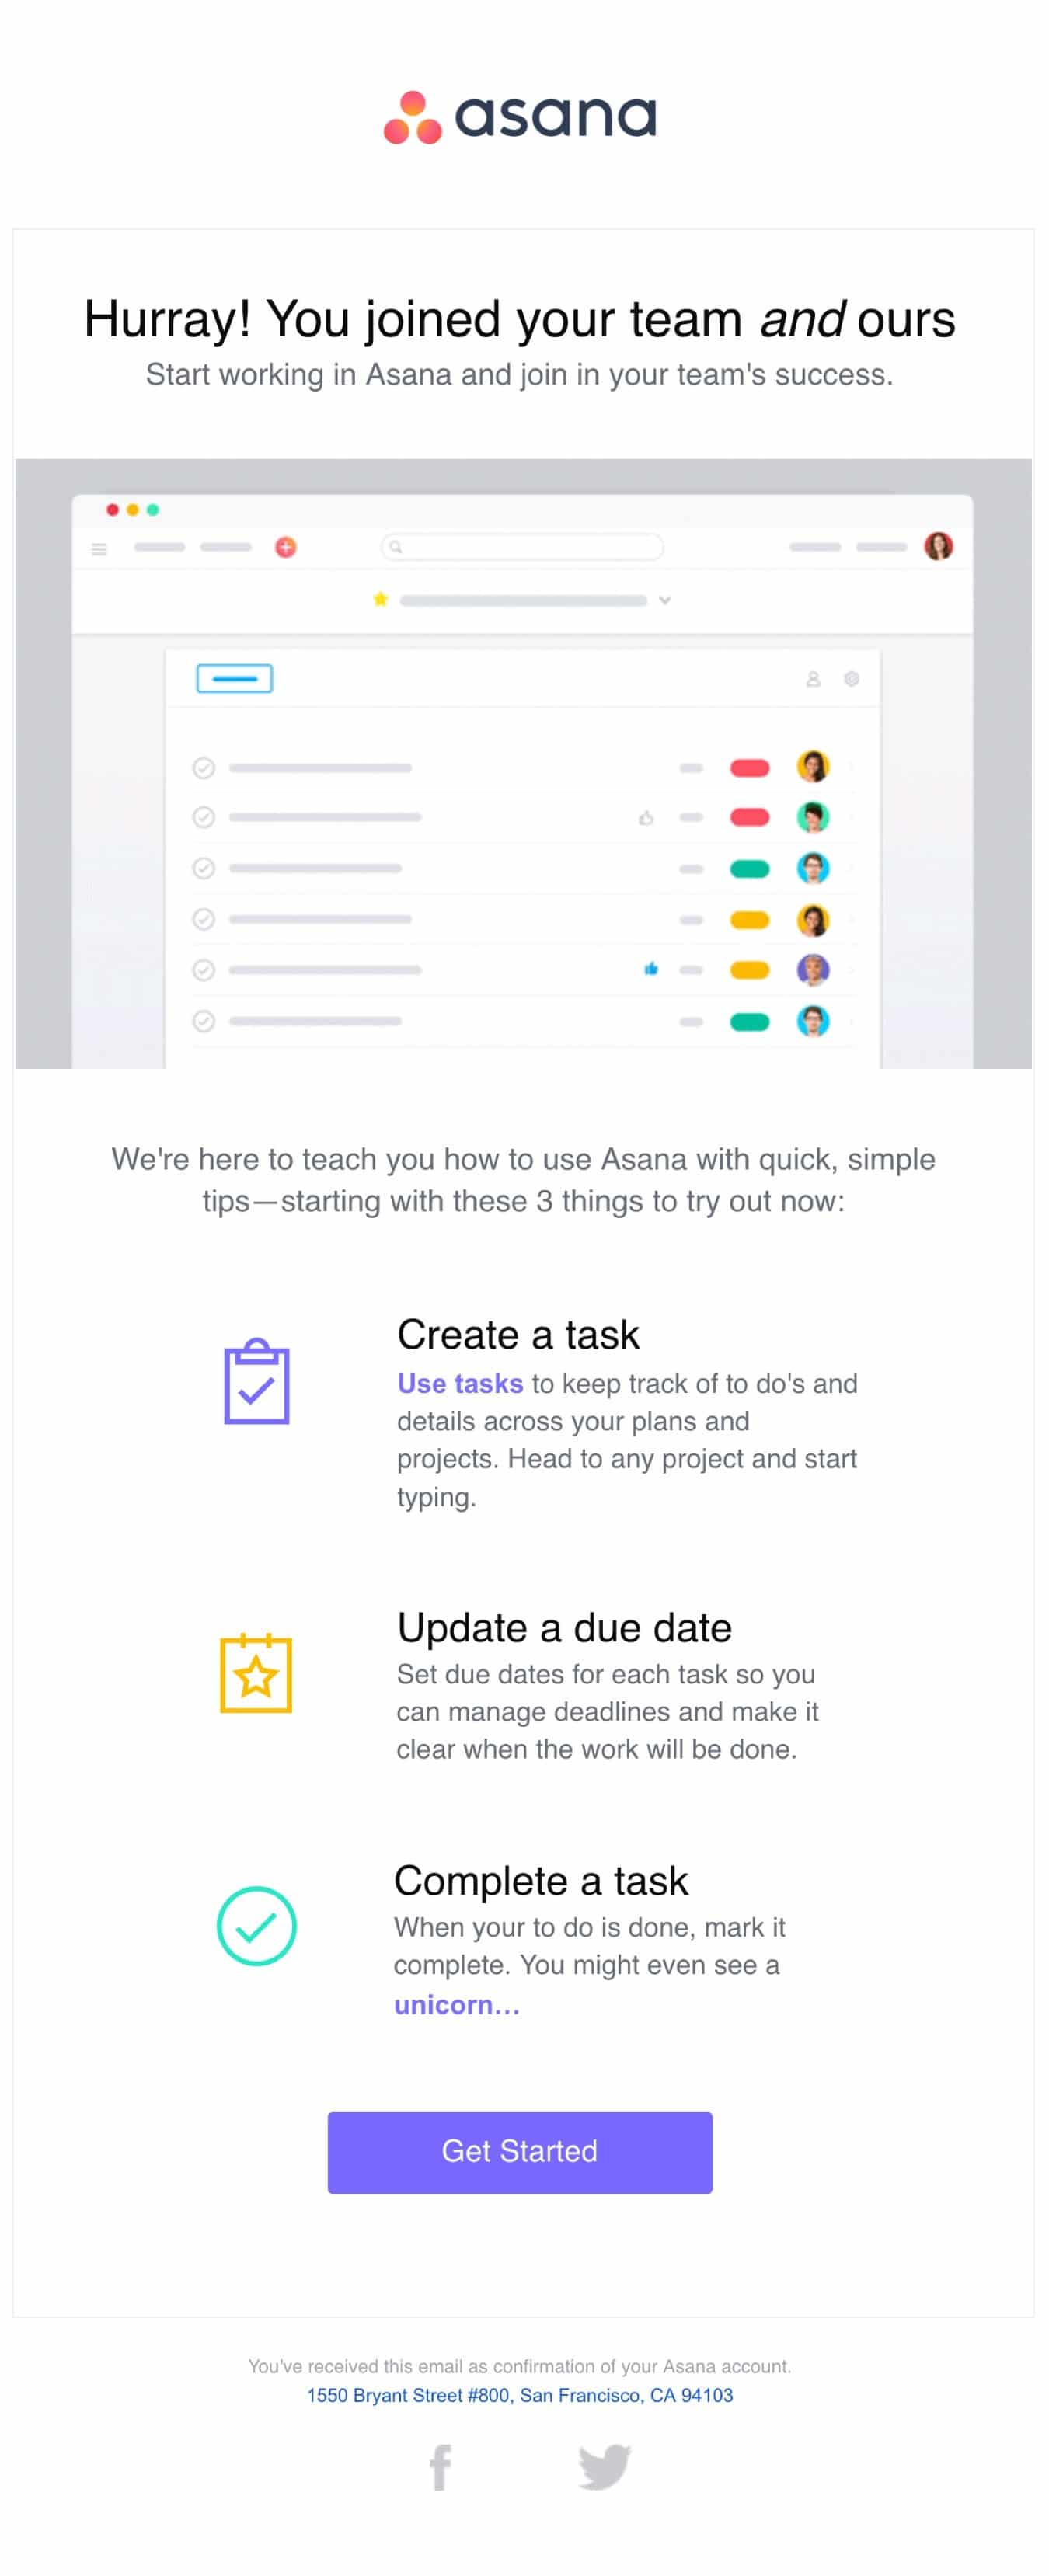 Asana email example - how to engage subscribers with a welcome email